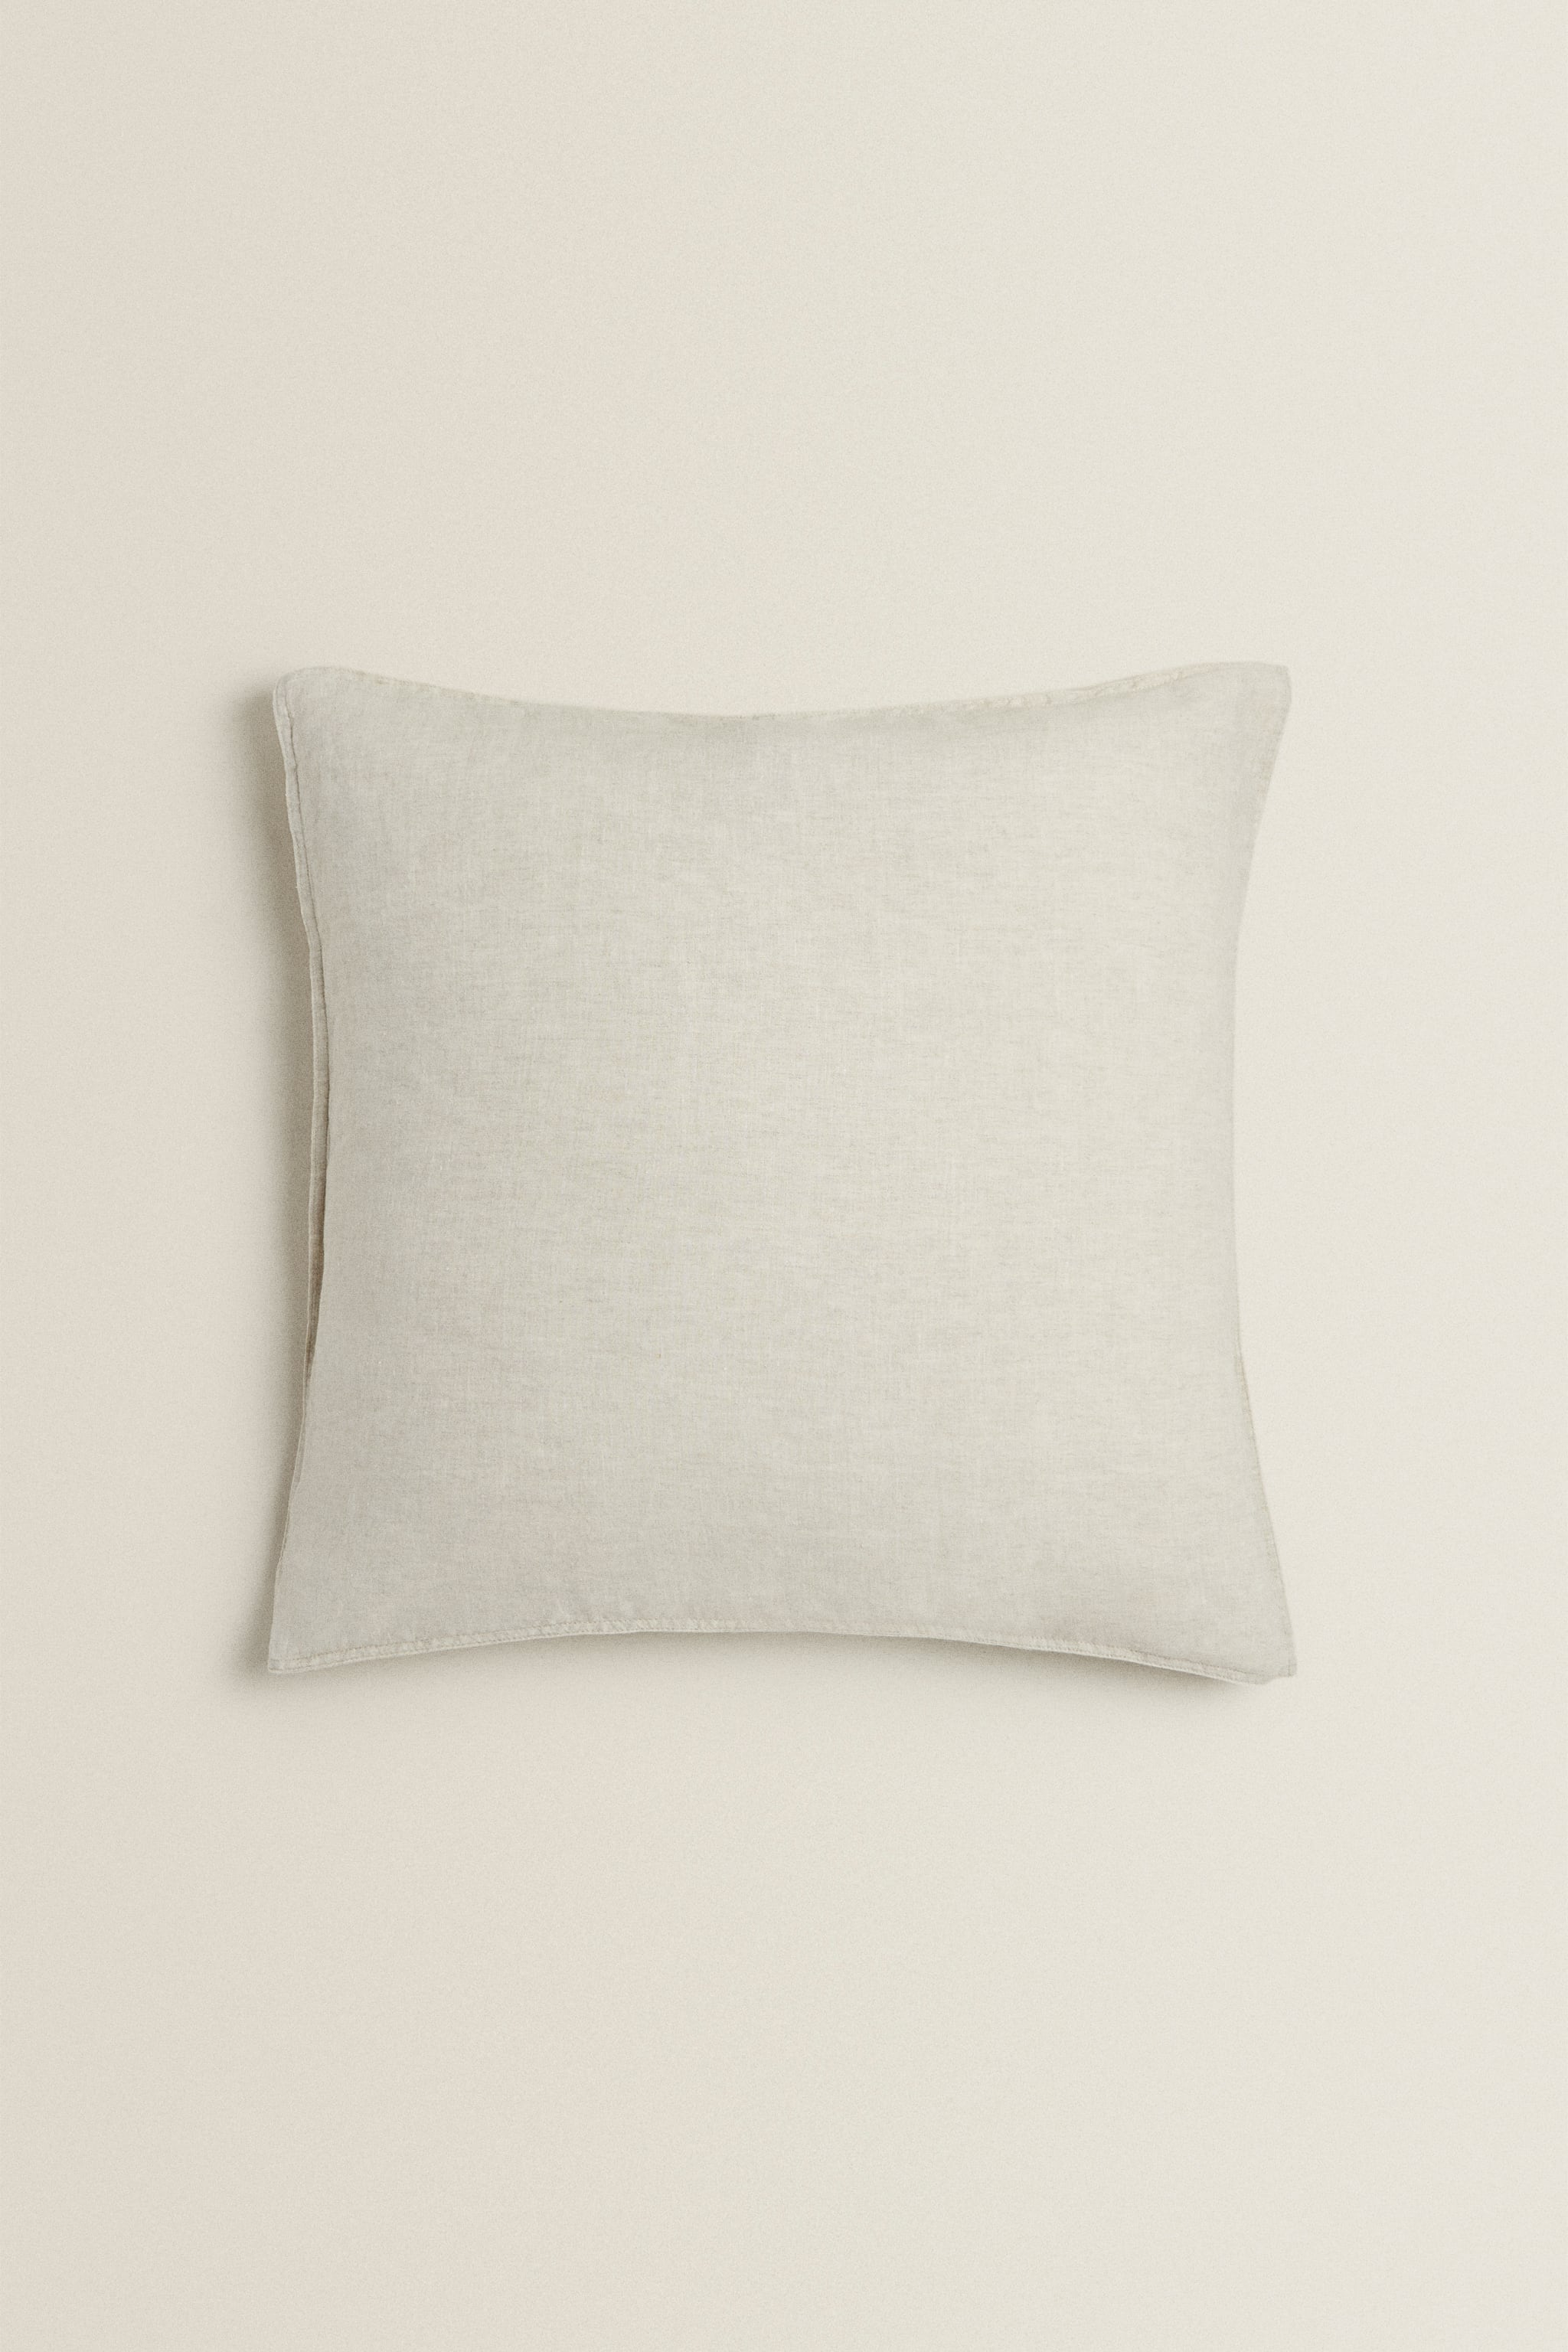 (160 GSM) WASHED LINEN PILLOWCASE